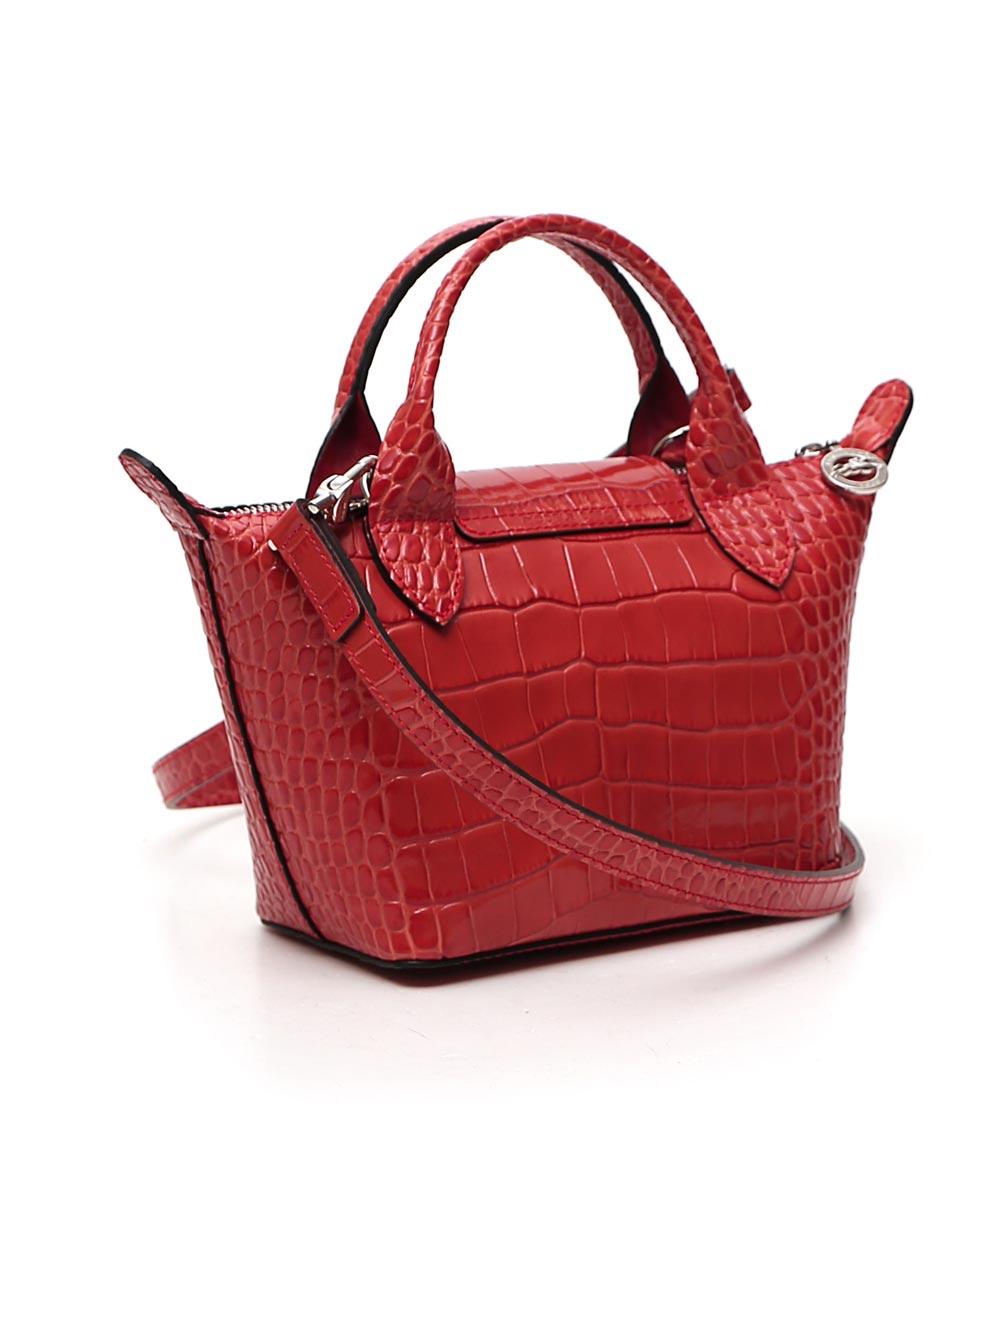 Longchamp Le Pliage Xs Top-handle Bag in Red